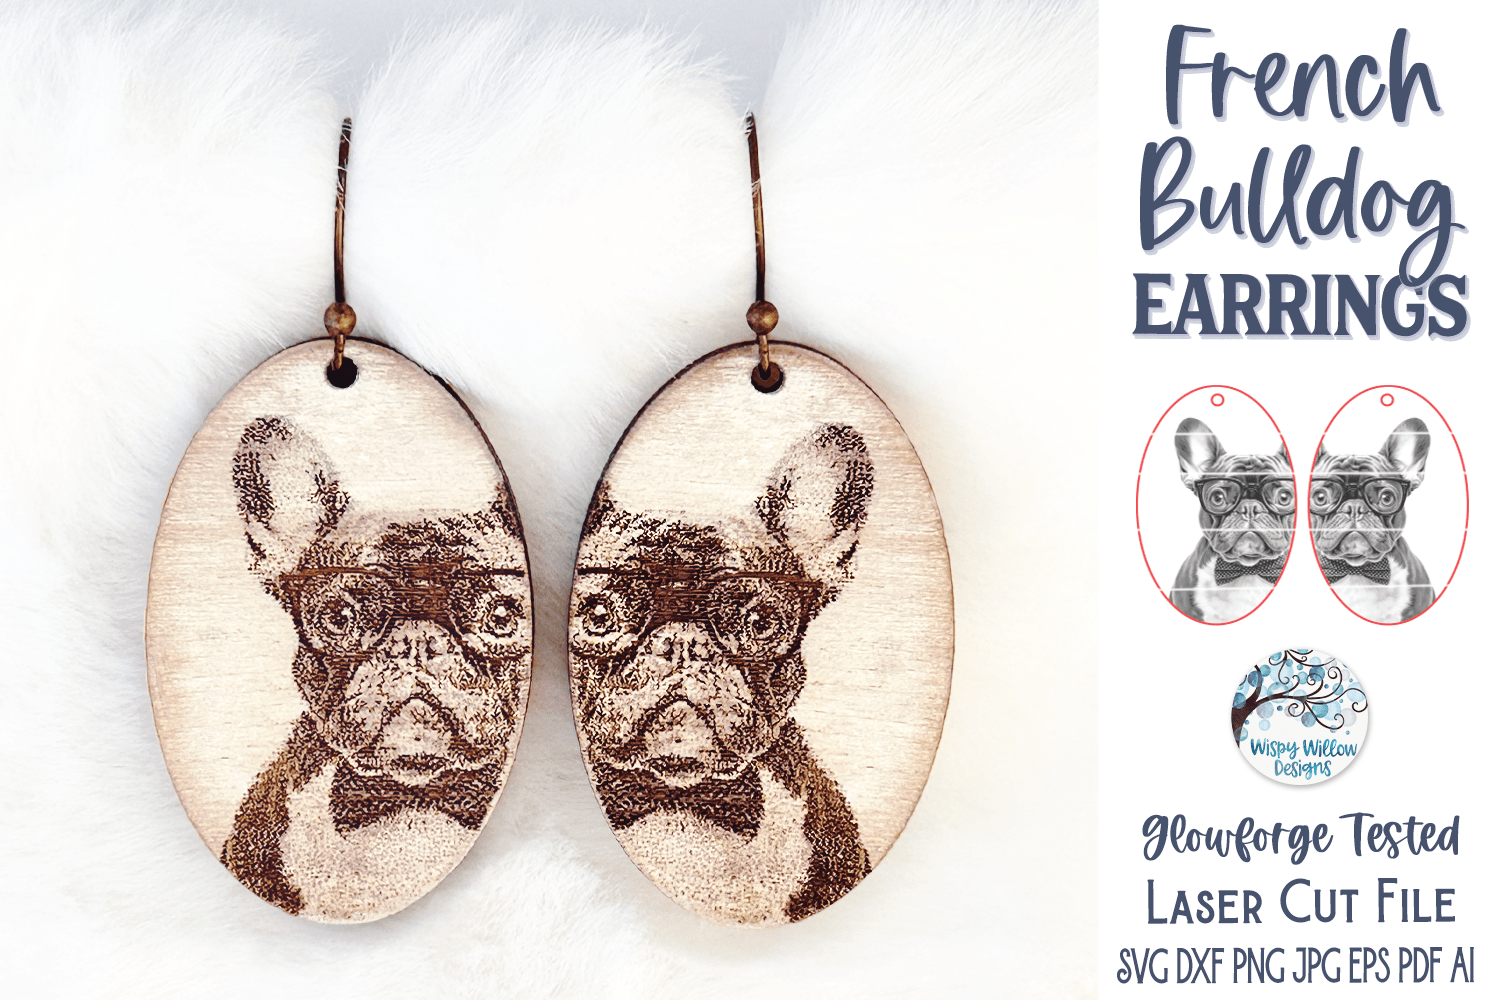 French Bulldog with Glasses Earring File for Glowforge or Laser Cutter Wispy Willow Designs Company